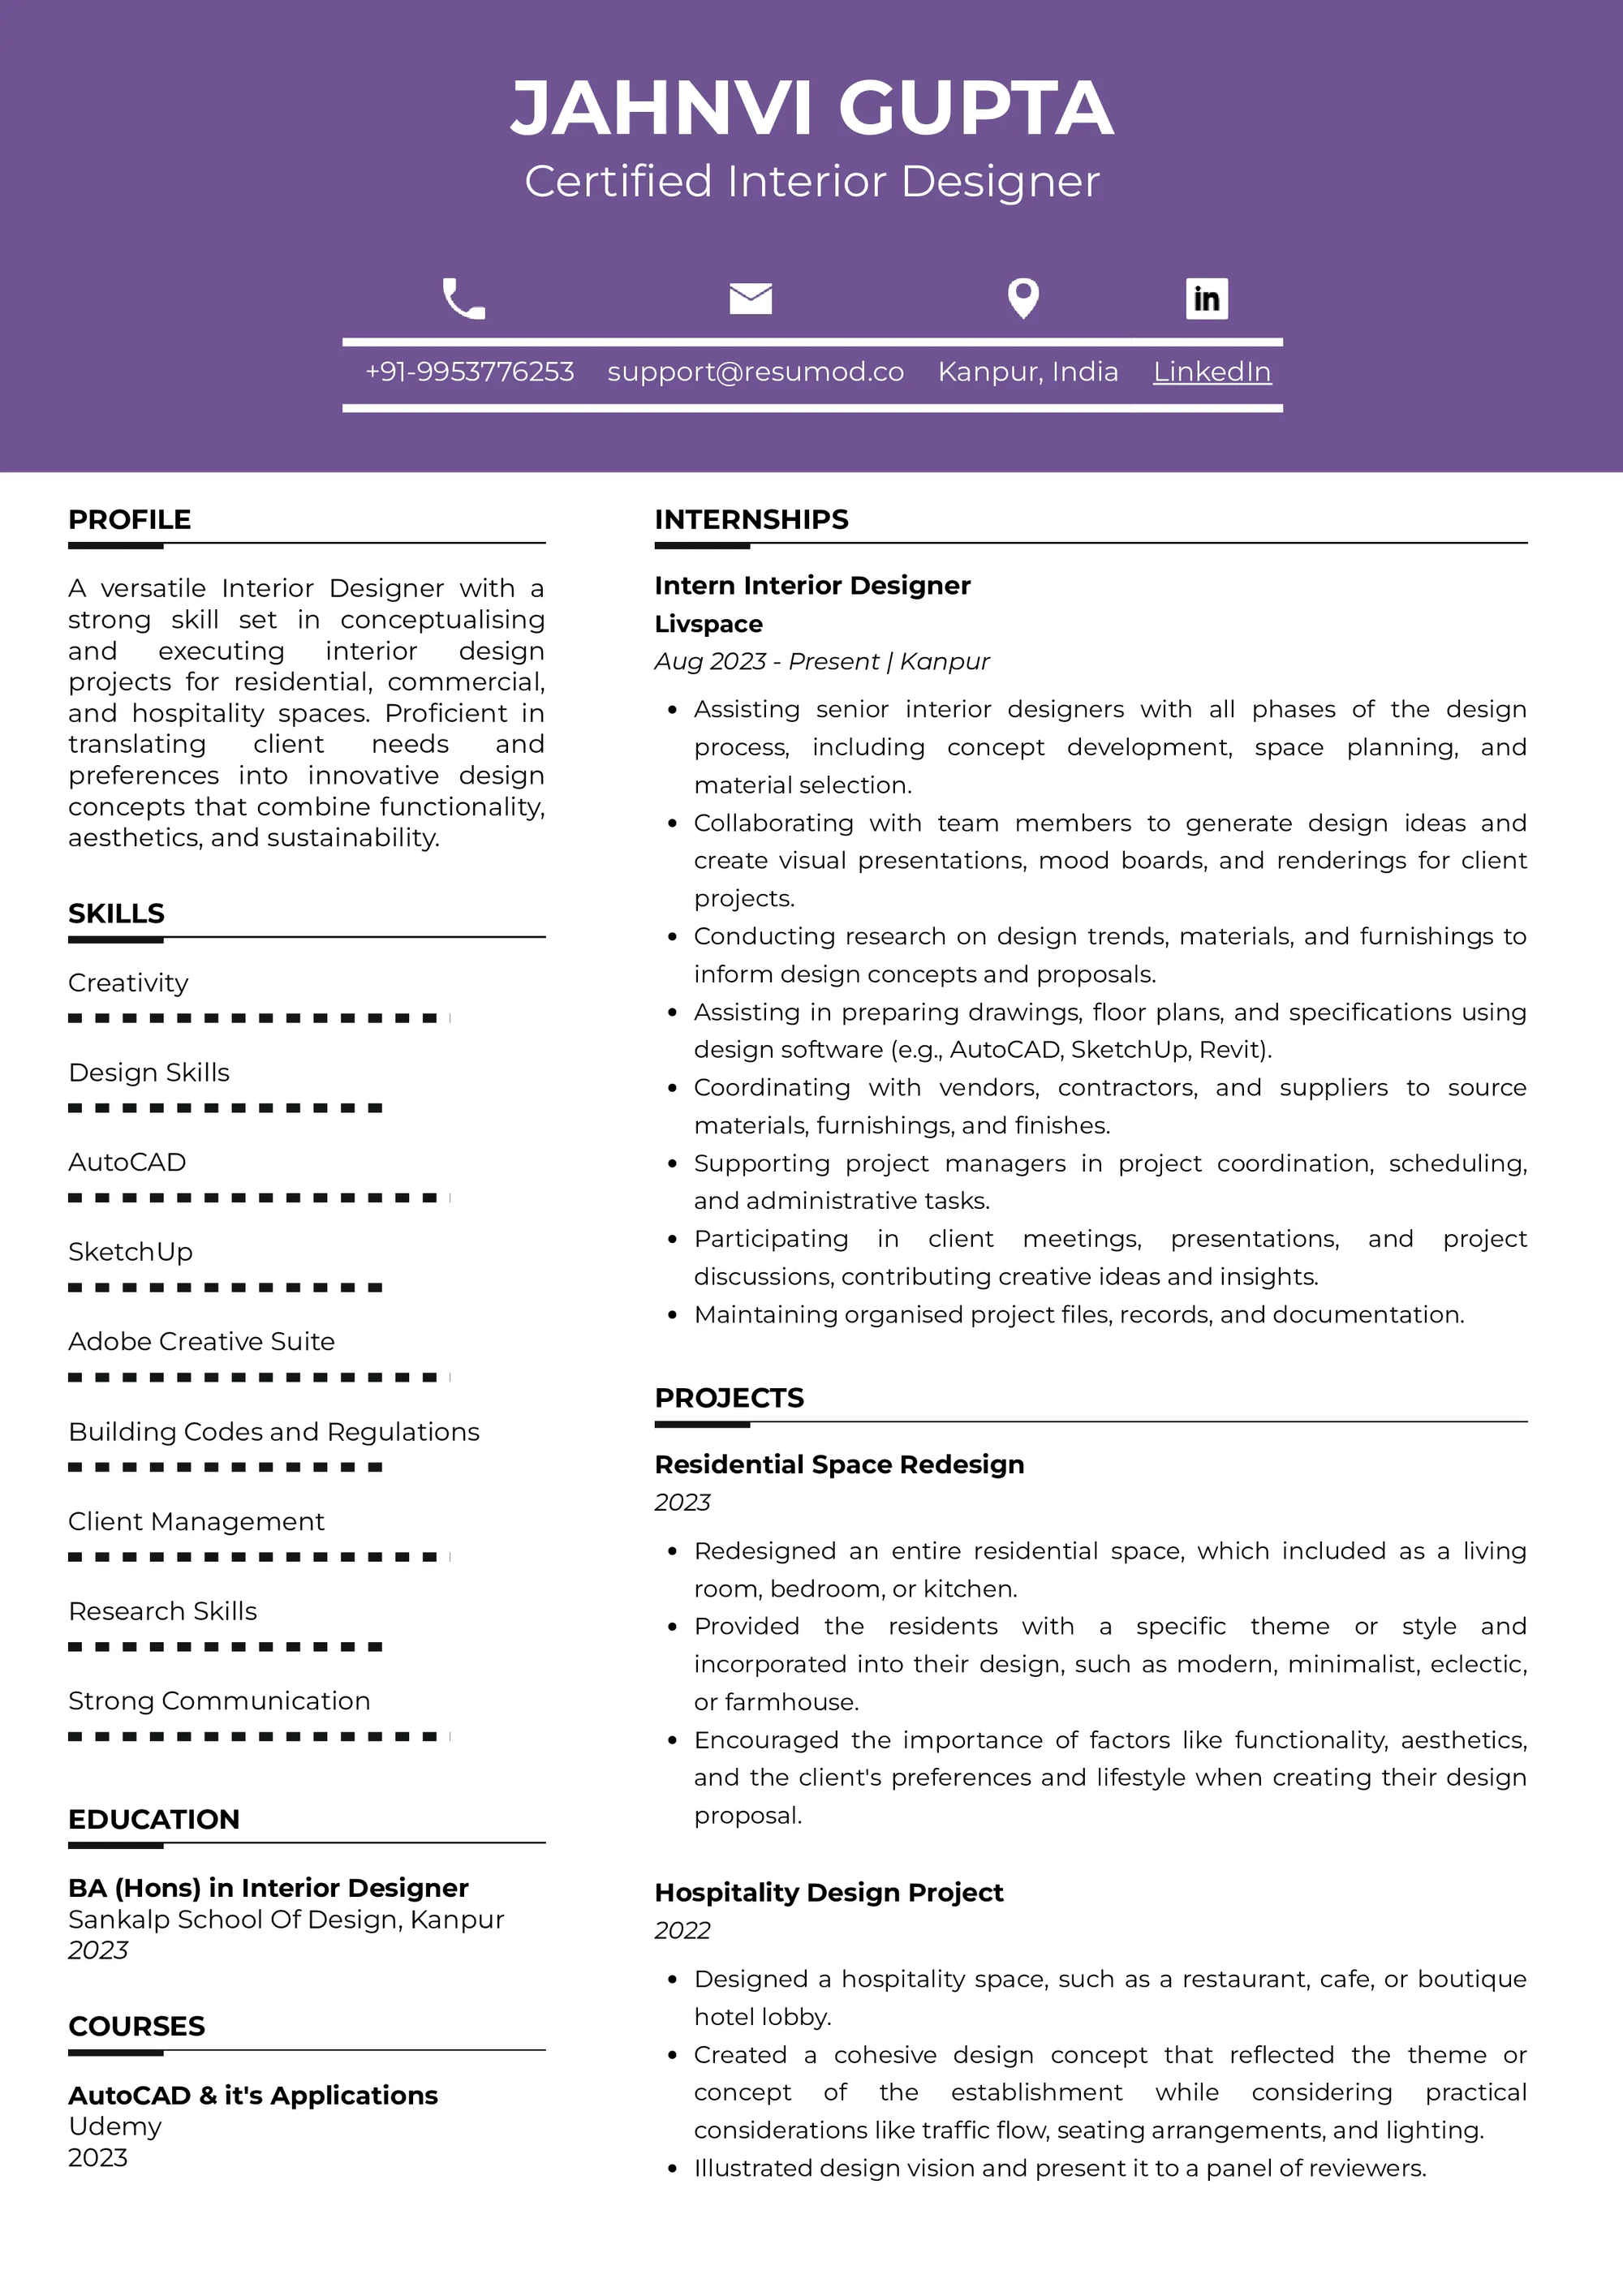 How to Write a Resume for Internships: A Comprehensive Guide